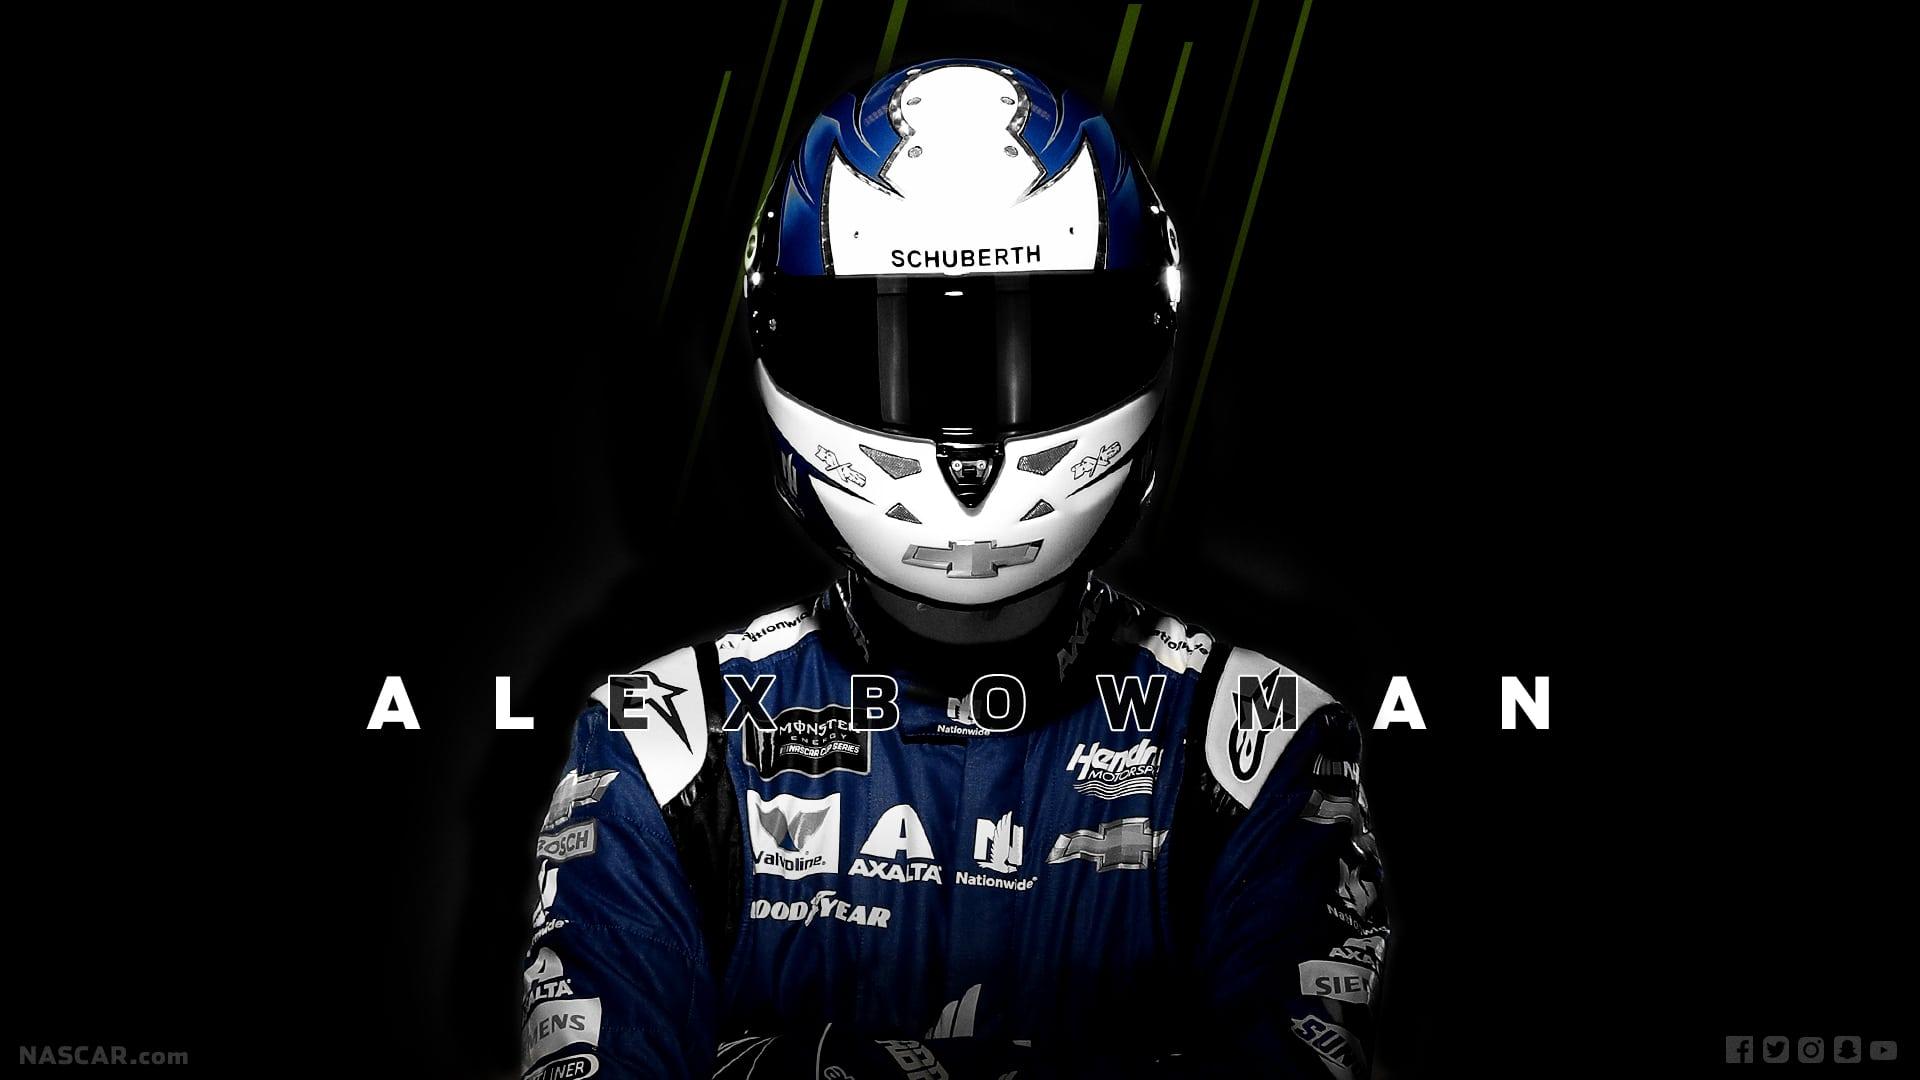 Playoff Wallpaper. Official Site Of NASCAR